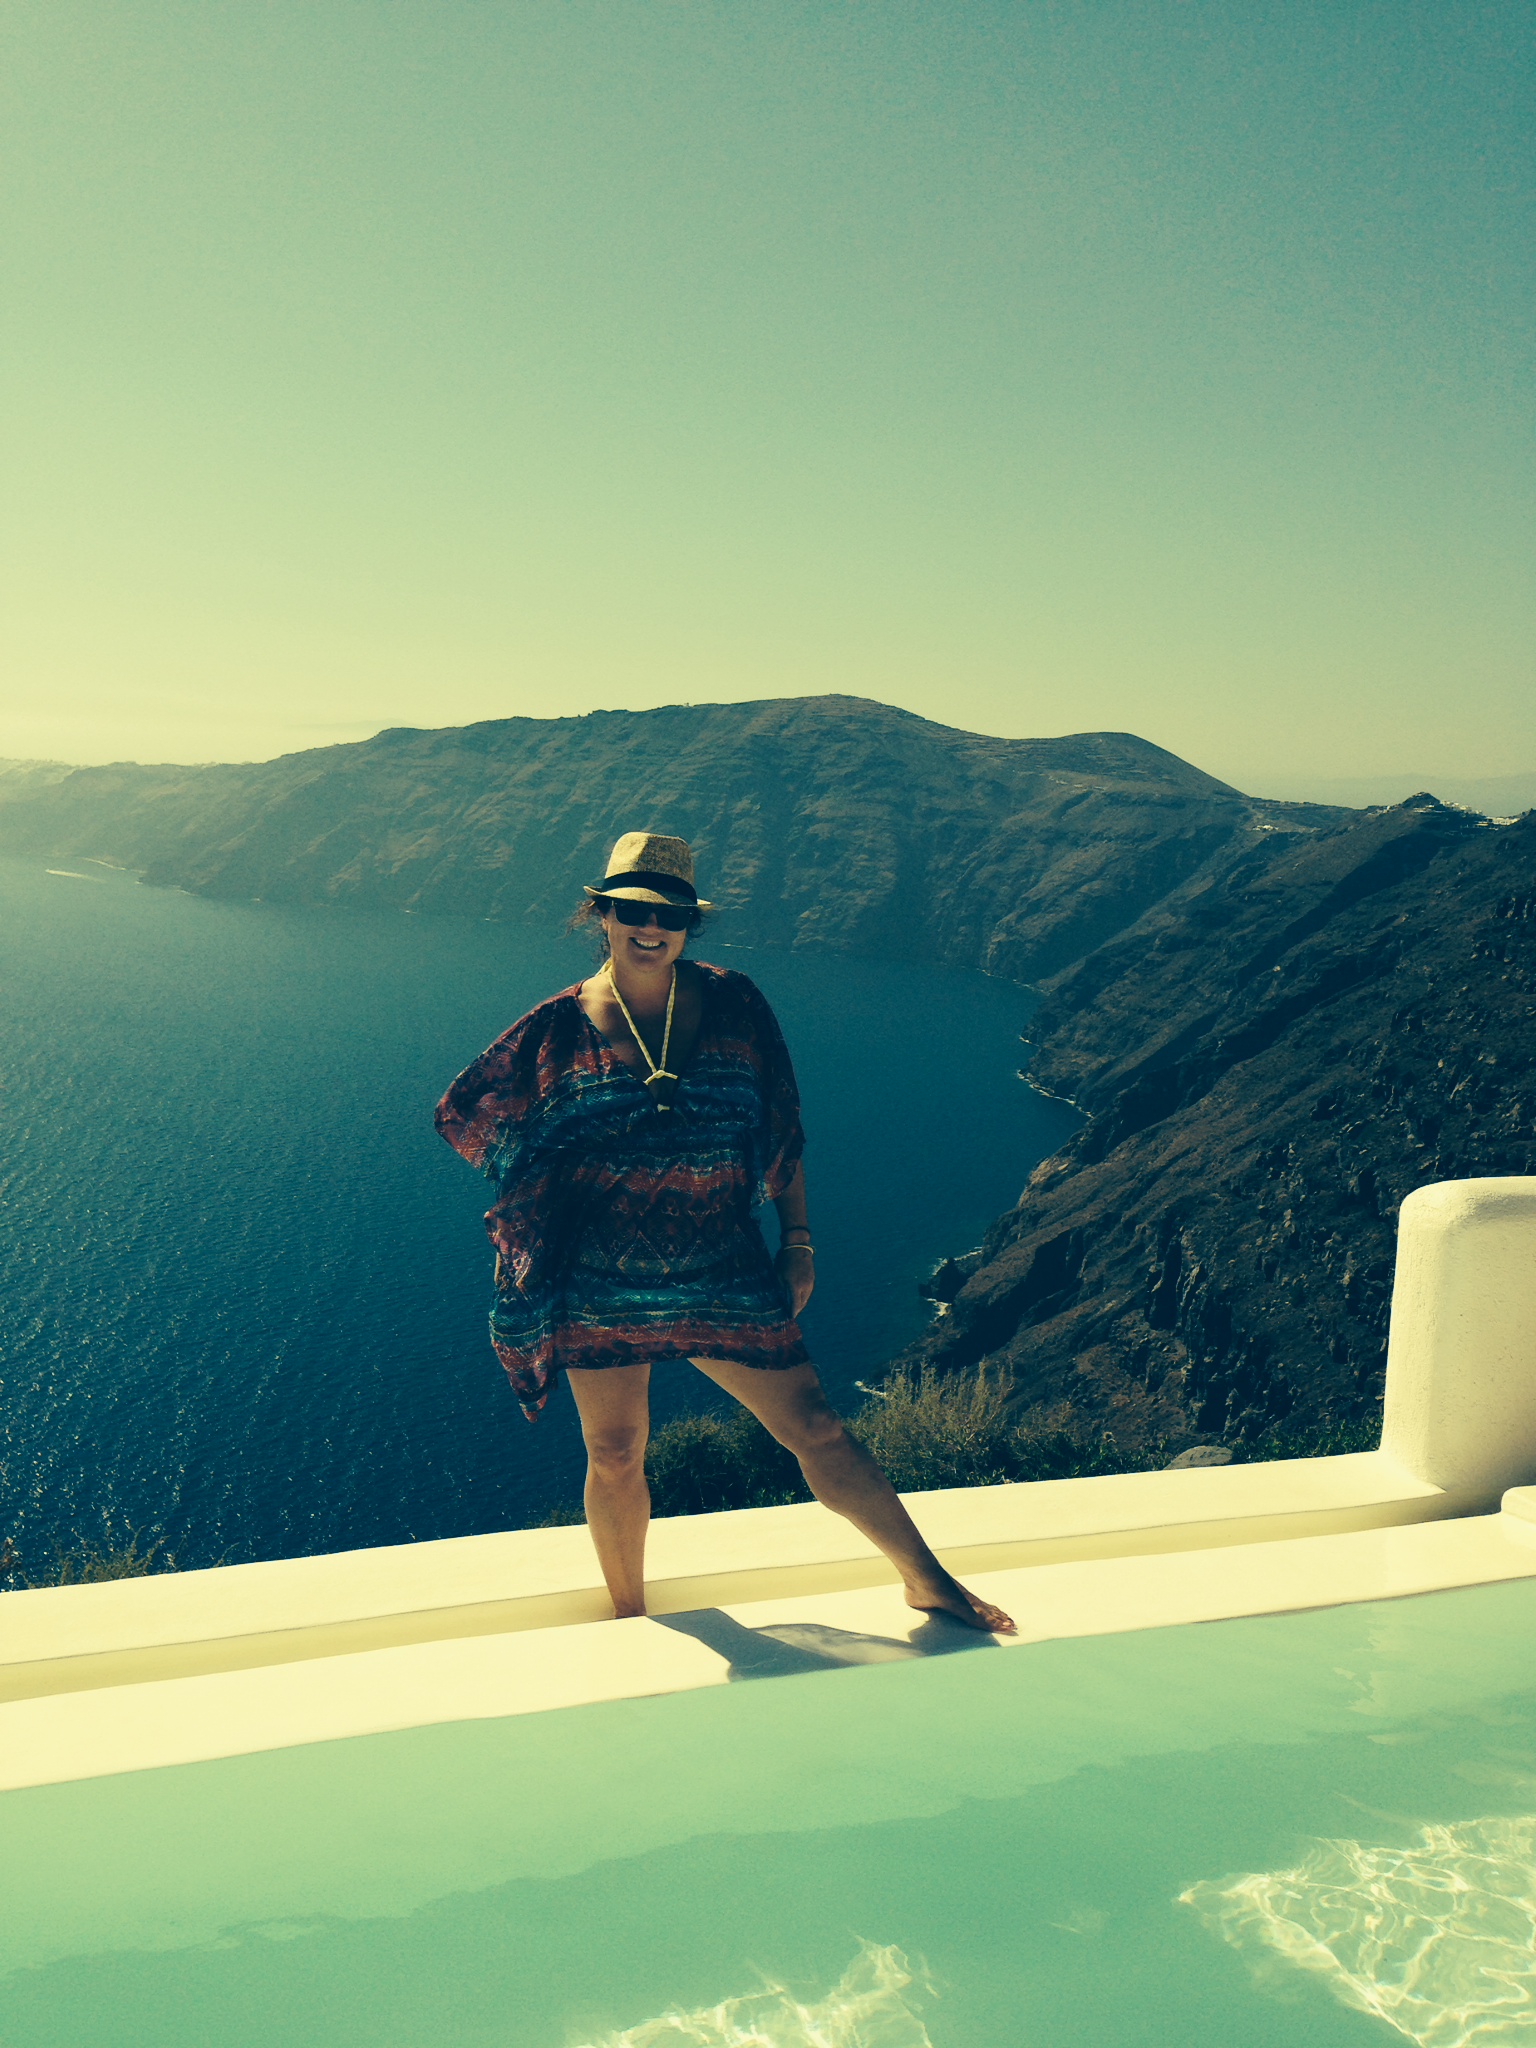 Staci vacationing in Greece.